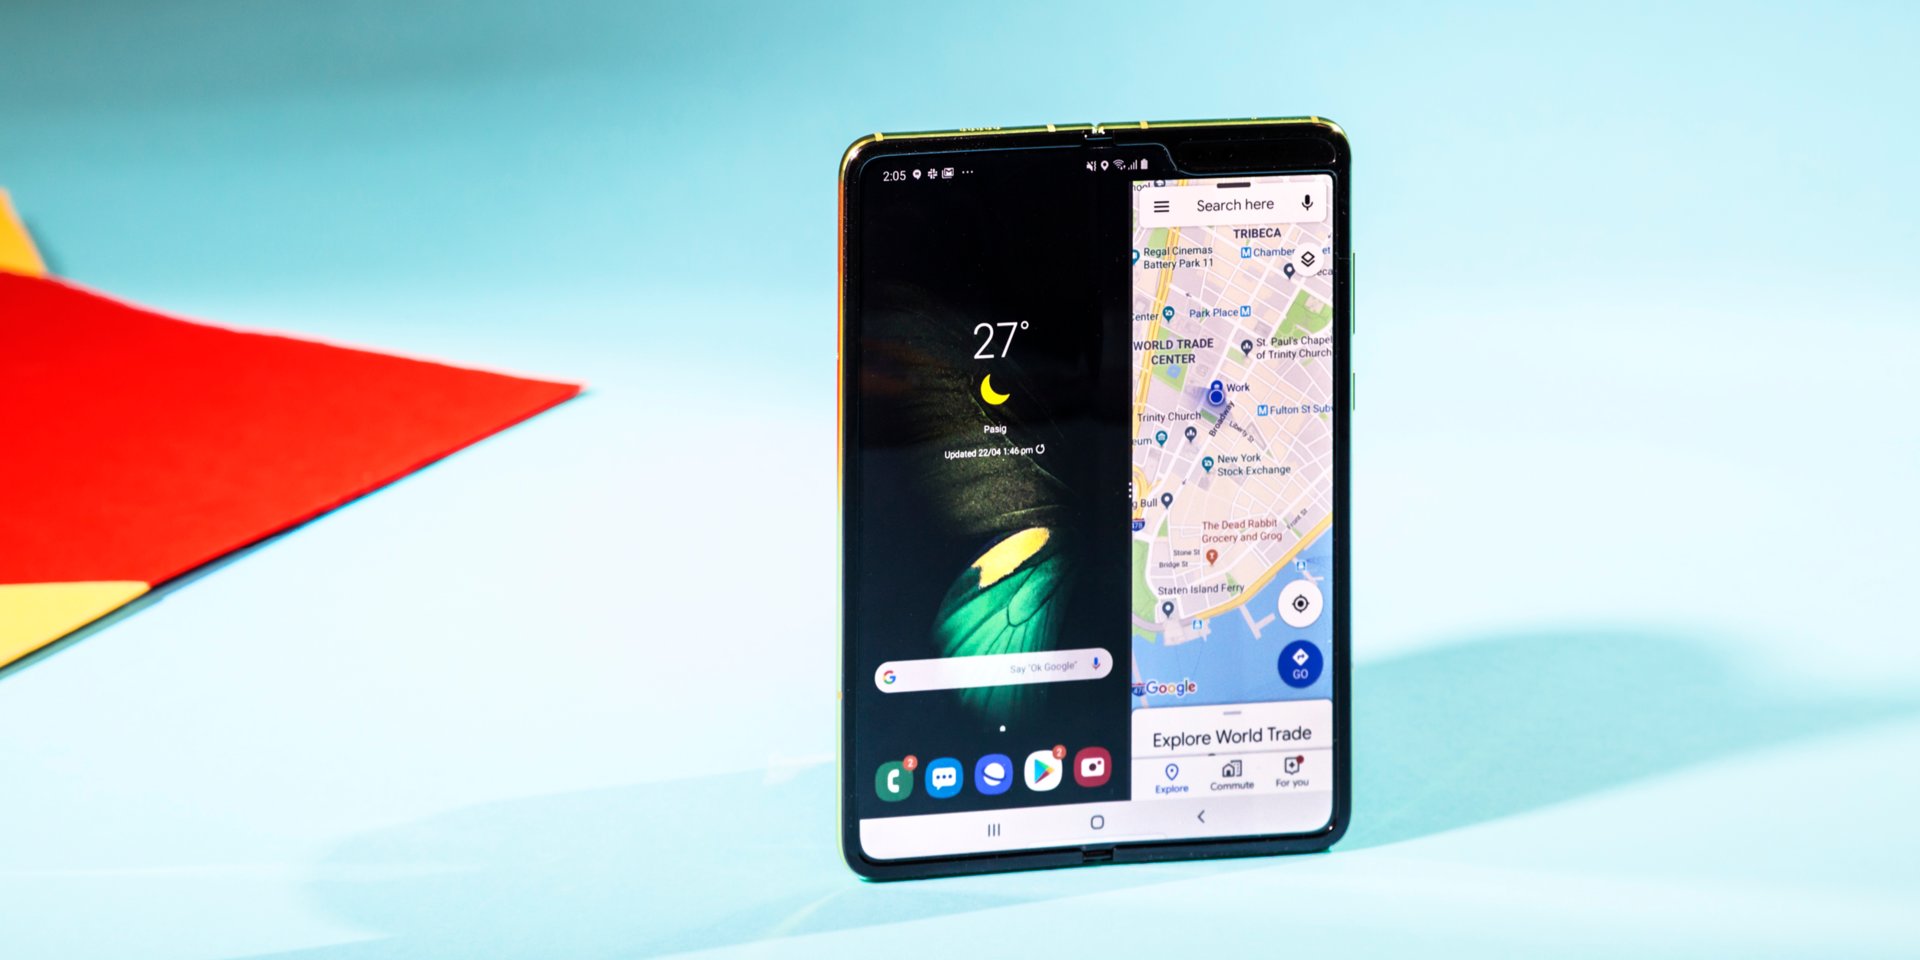 Samsung Galaxy Fold Is Expected To Launch On September 27 In The US